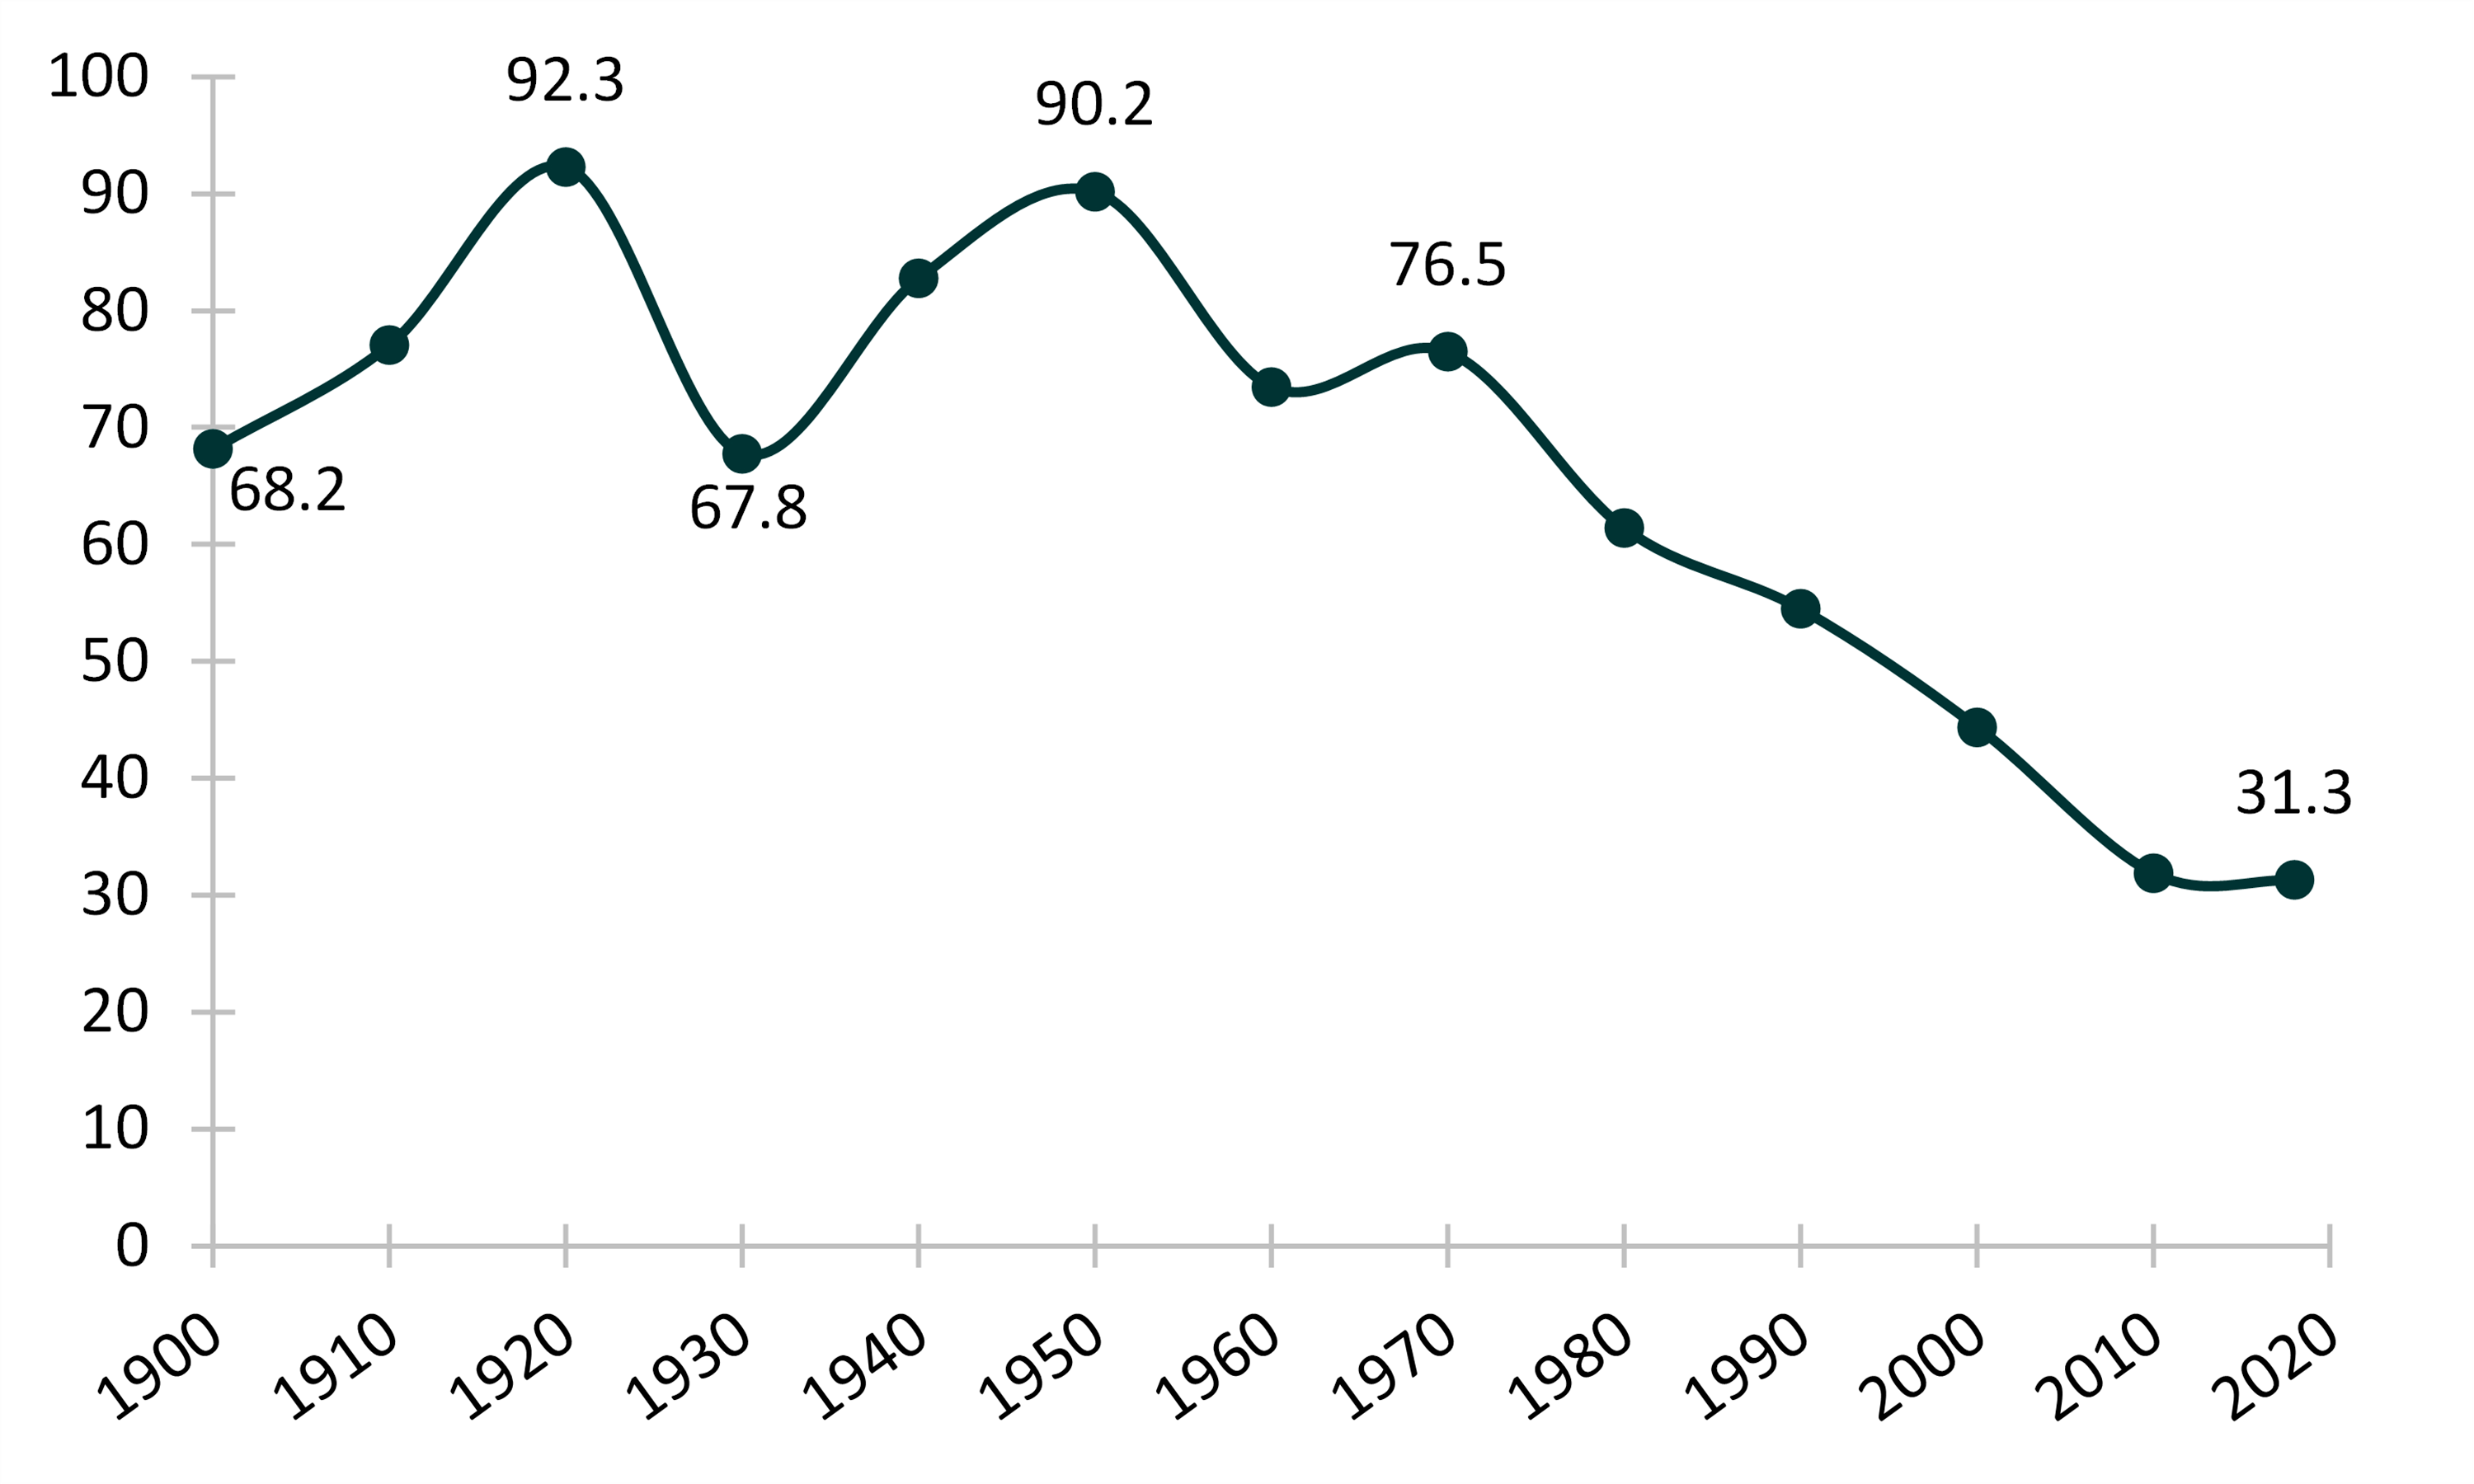 teal line chart showing Figure 1. Change in the Marriage Rate in the U.S., 1900-2018